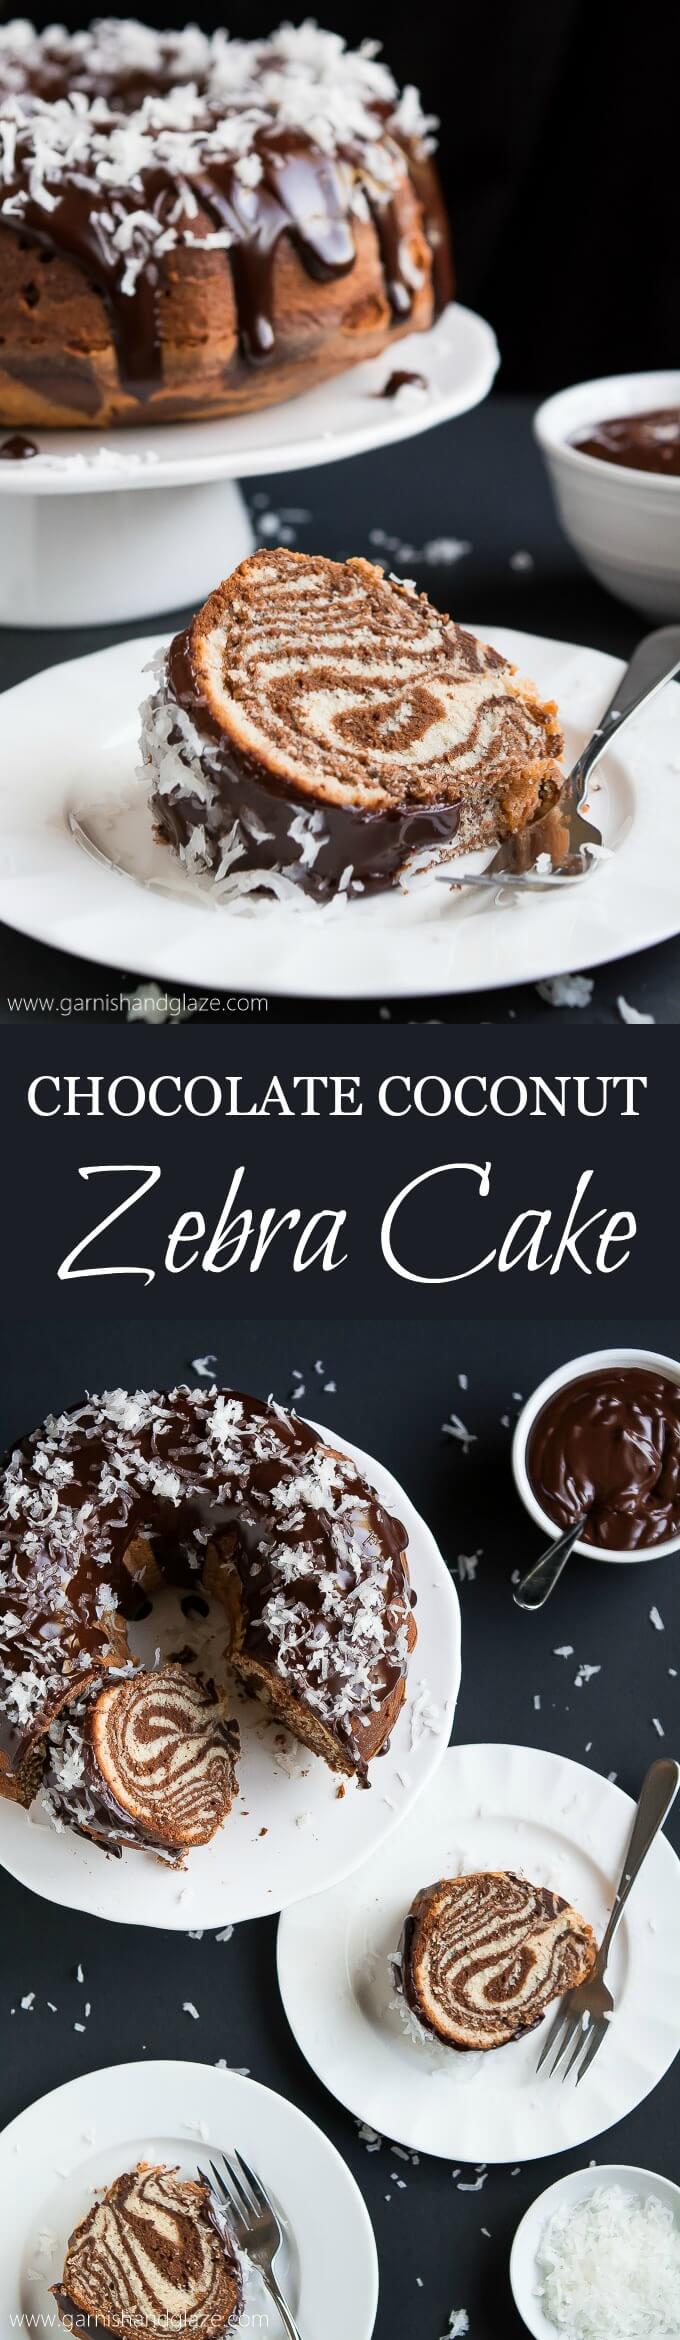 Your dinner guests will be in awe of this gorgeous, yet easy to make, Surprise-Inside Chocolate Coconut Zebra Cake topped with ganache and sweet coconut flakes.